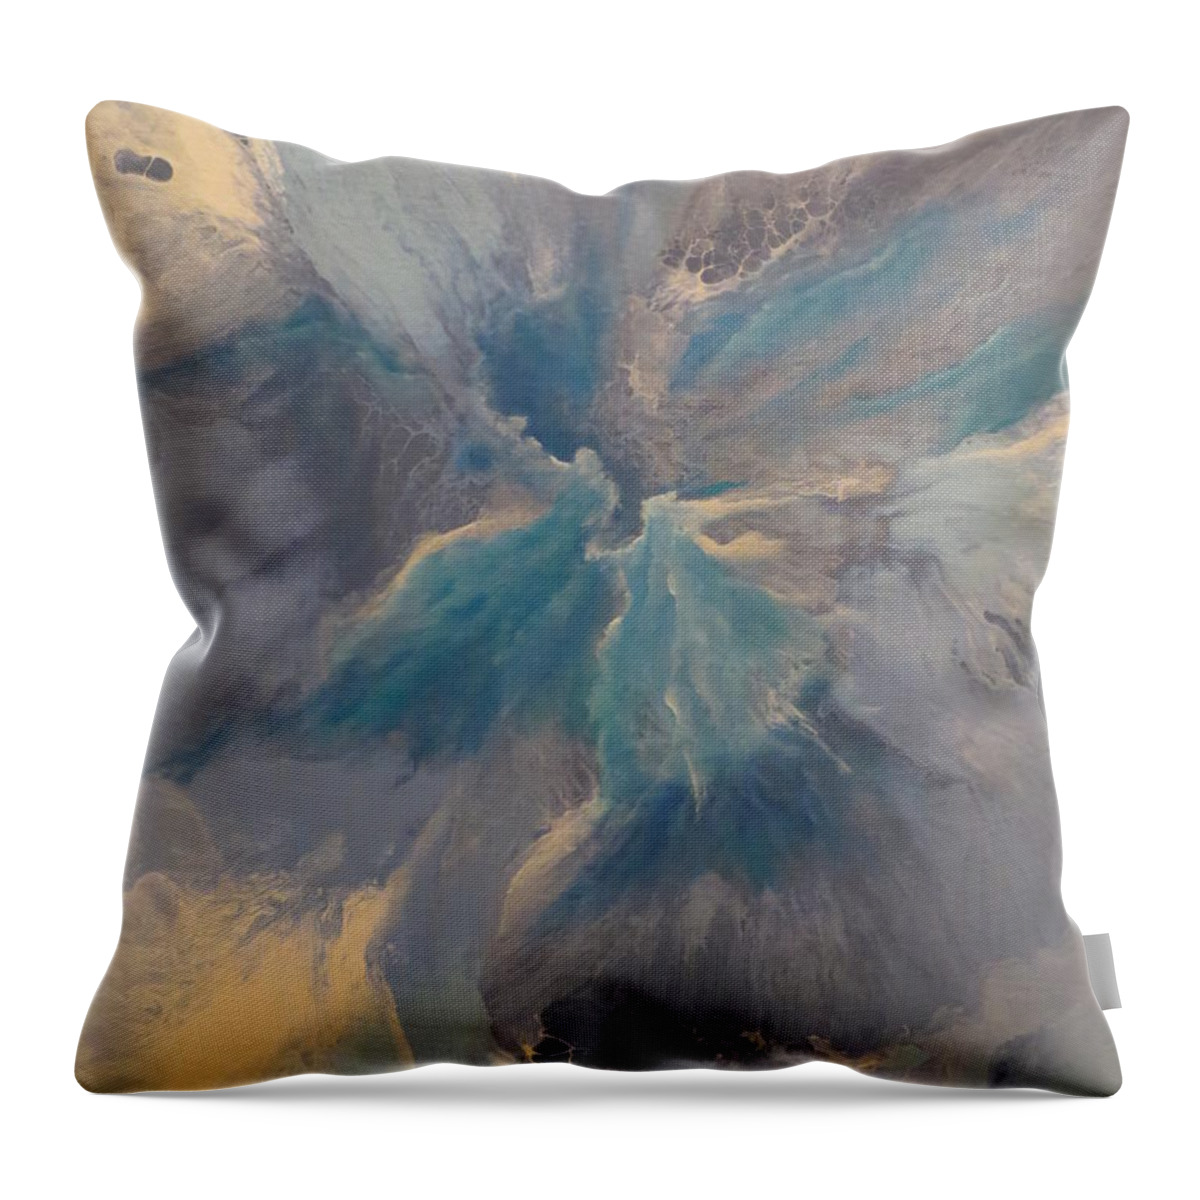 Abstract Throw Pillow featuring the painting Twins by Soraya Silvestri